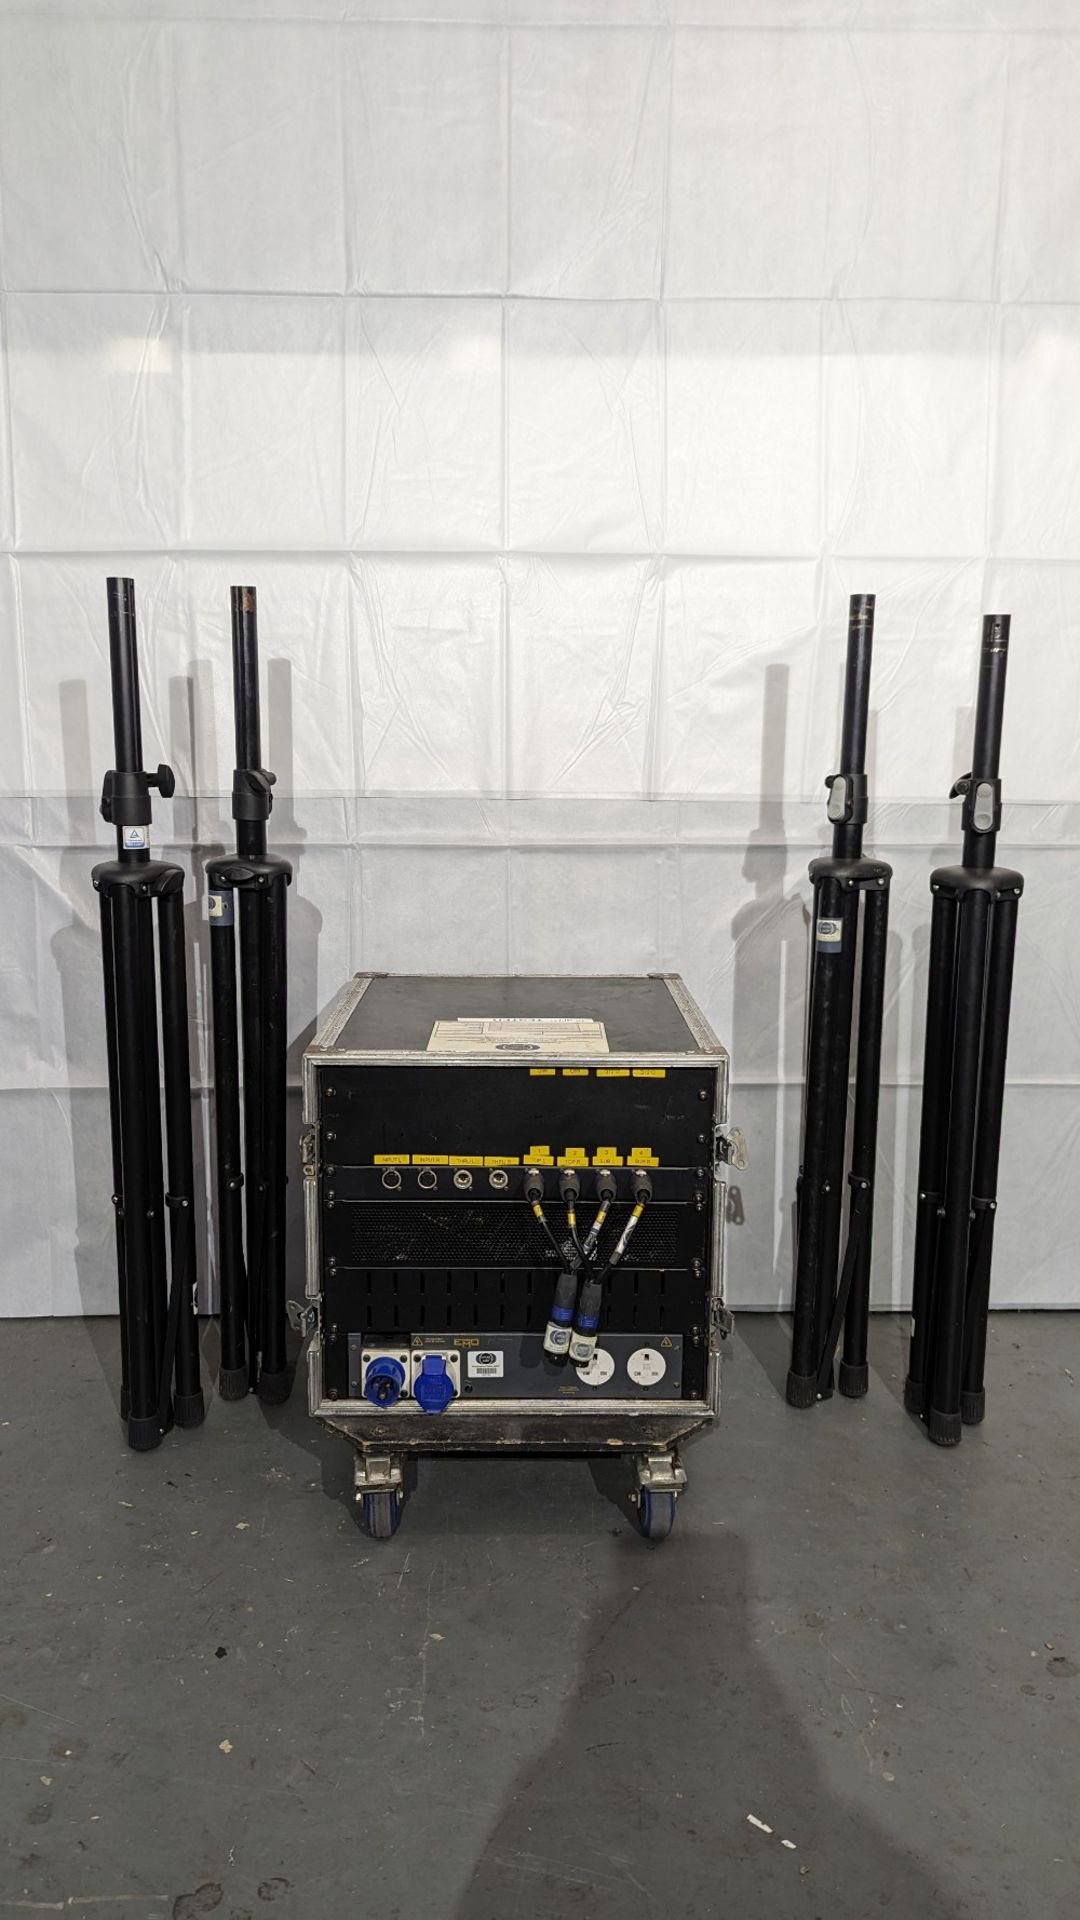 Electro-Voice PA Sound System - (4) TX1152 Speakers, (2) TX1181 Subs & Associated Equipment - Image 13 of 14